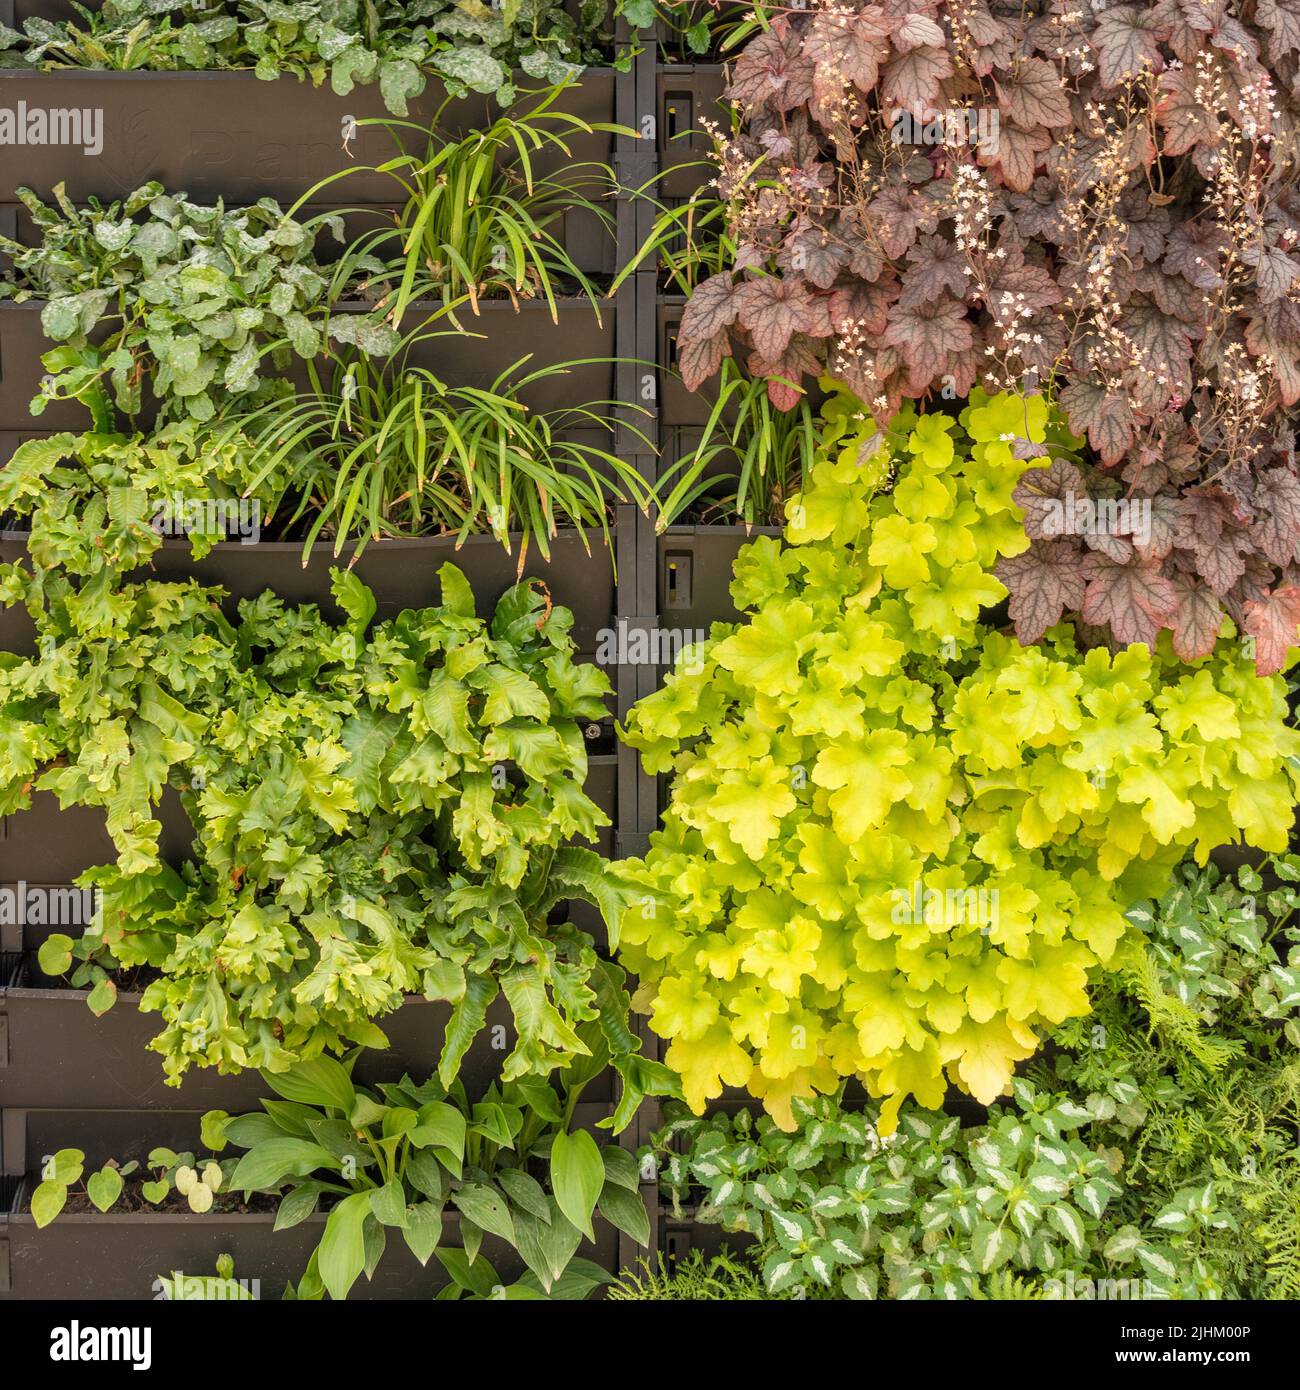 Vertical gardening. Plastic troughs attached to an outdoor wall, planted up with ferns and heucheras to make a living green wall. Stock Photo